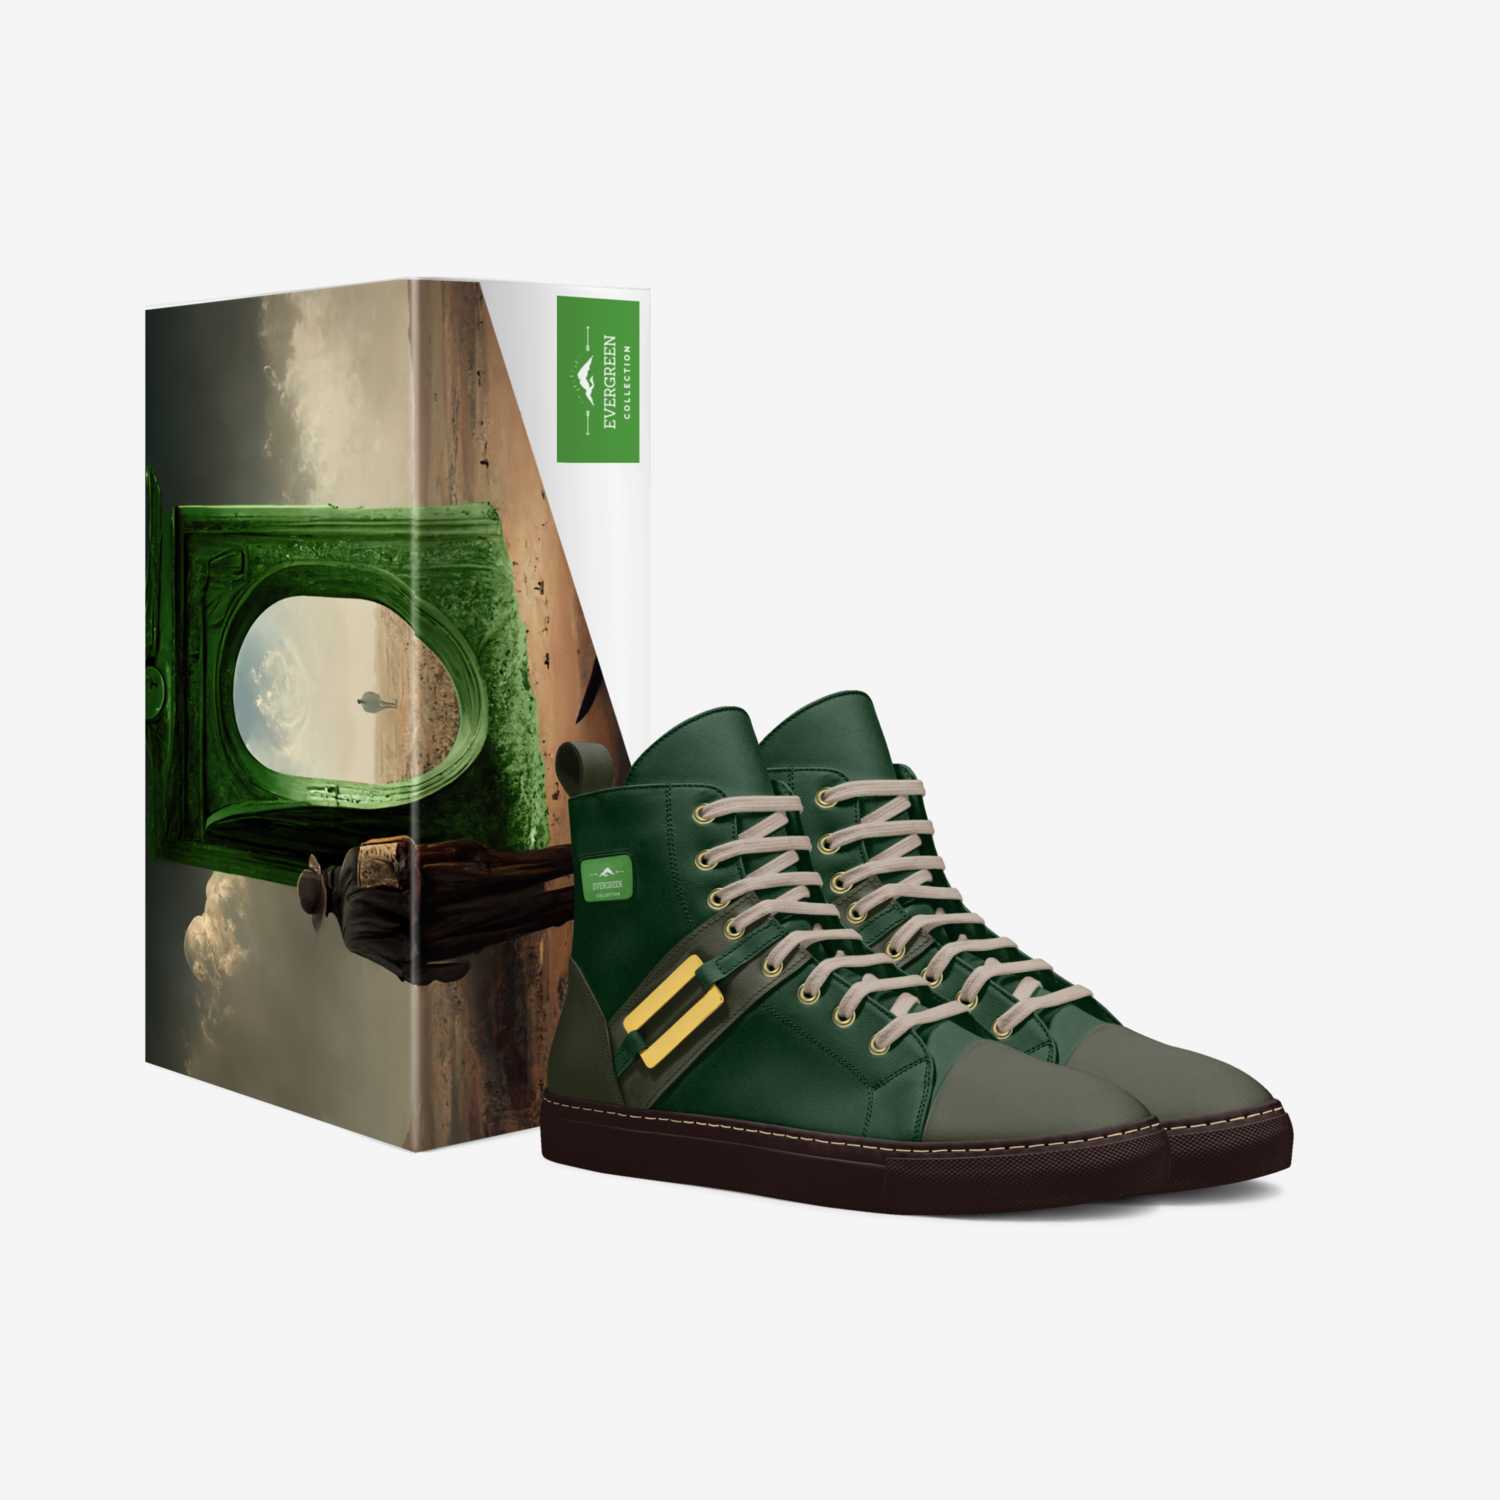 EVERGREEN custom made in Italy shoes by Michael Lee | Box view